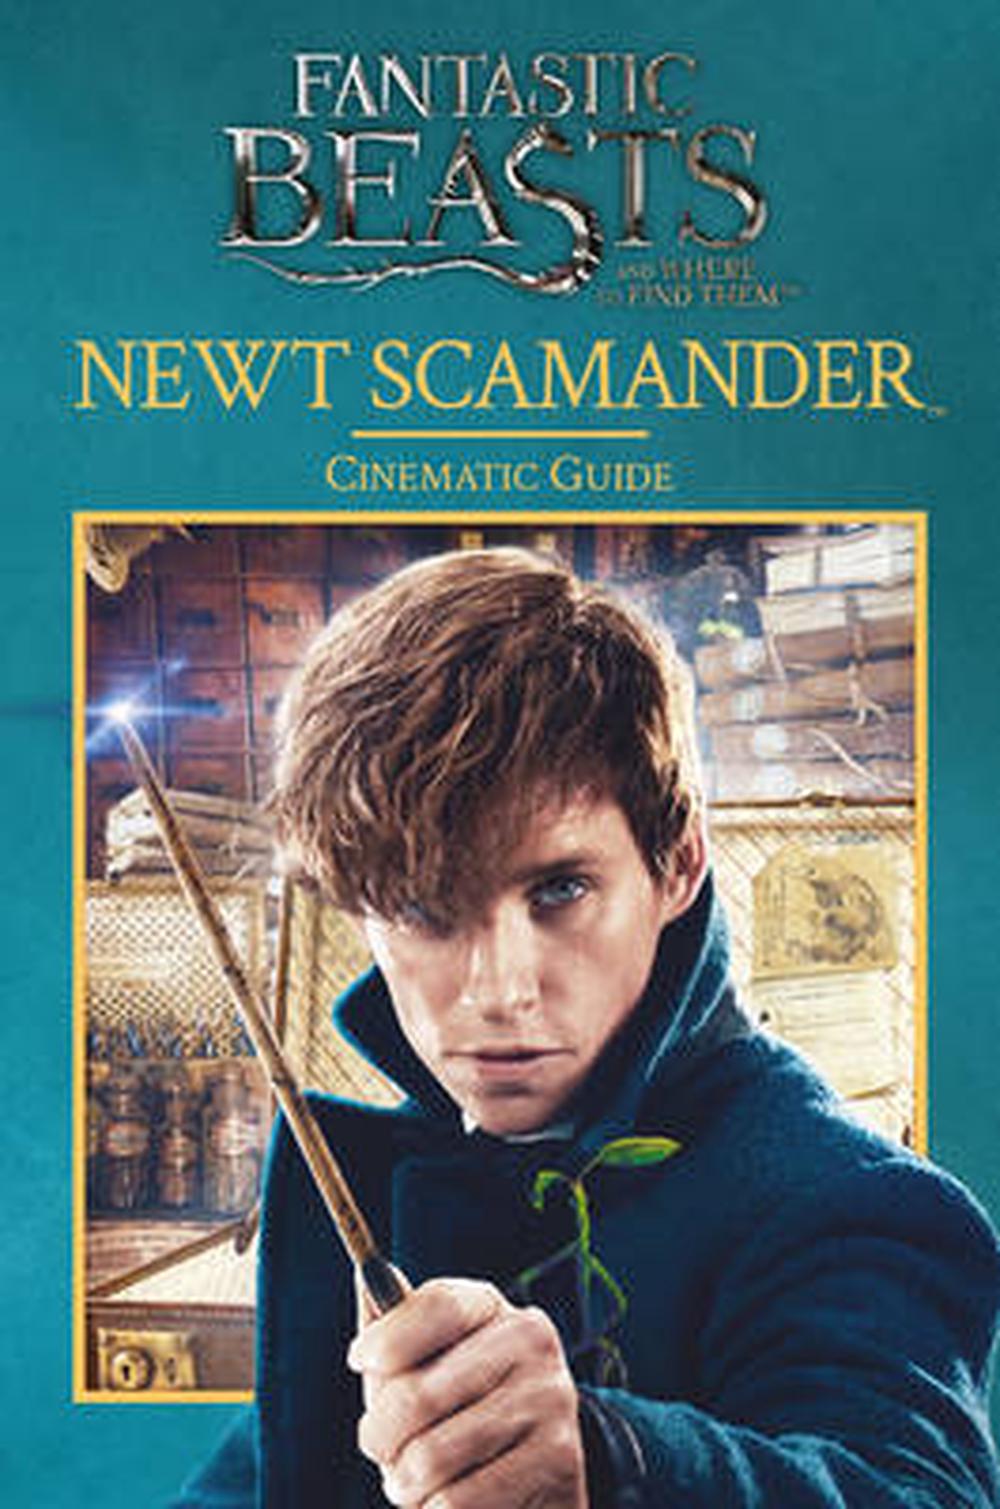 Fantastic Beasts and Where to Find Them: Newt Scamander: Cinematic Guide by Scho - Bild 1 von 1